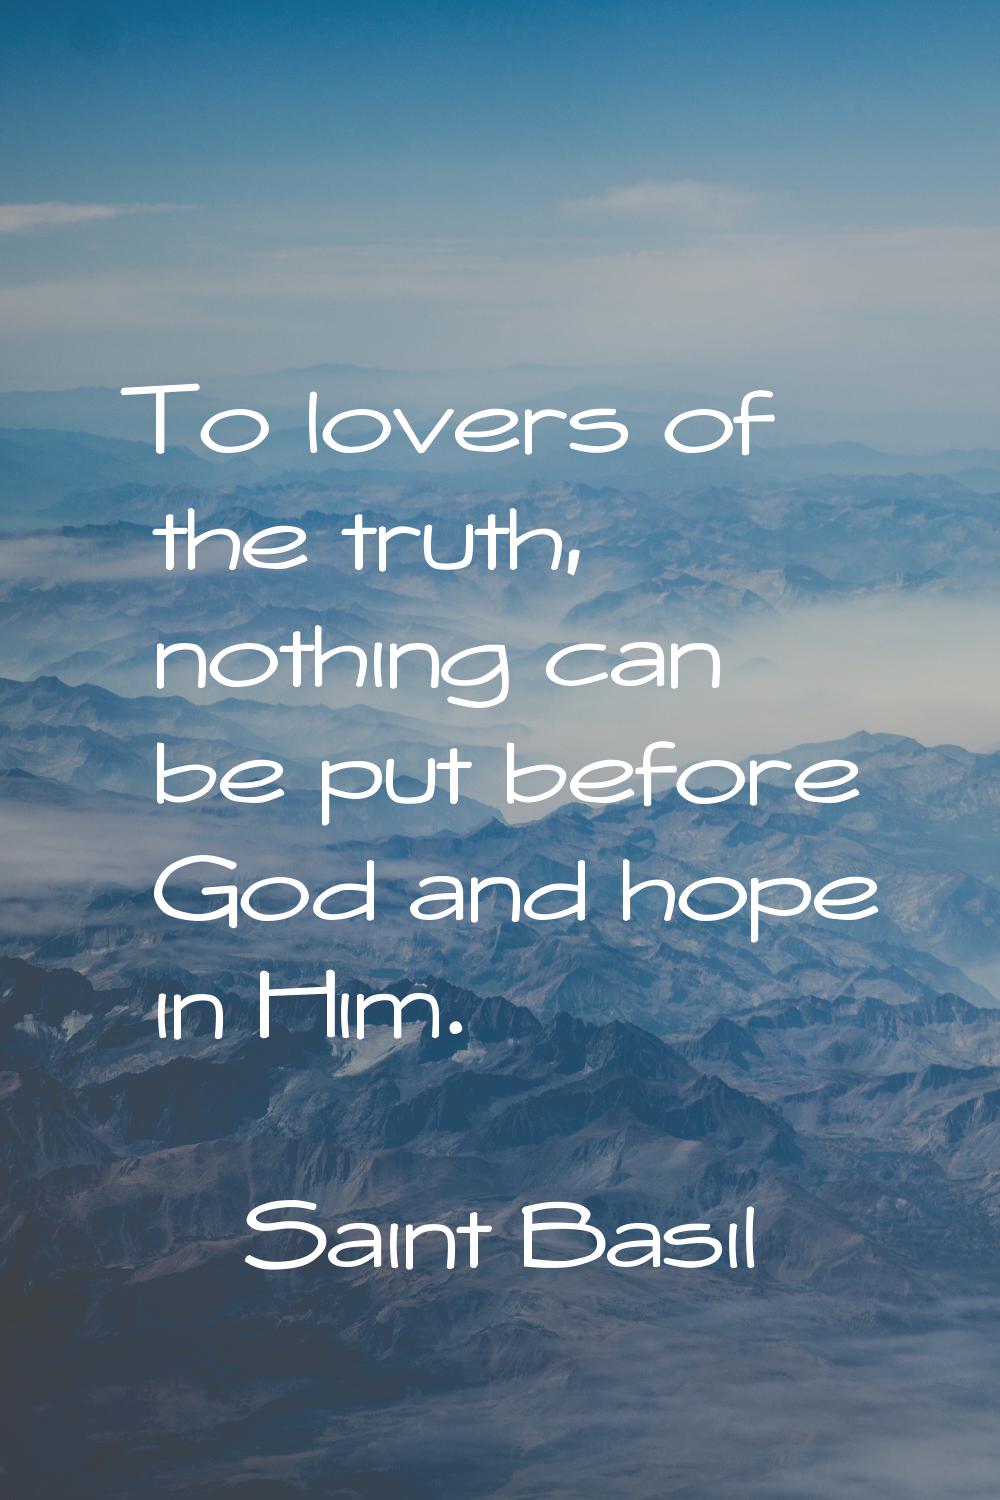 To lovers of the truth, nothing can be put before God and hope in Him.